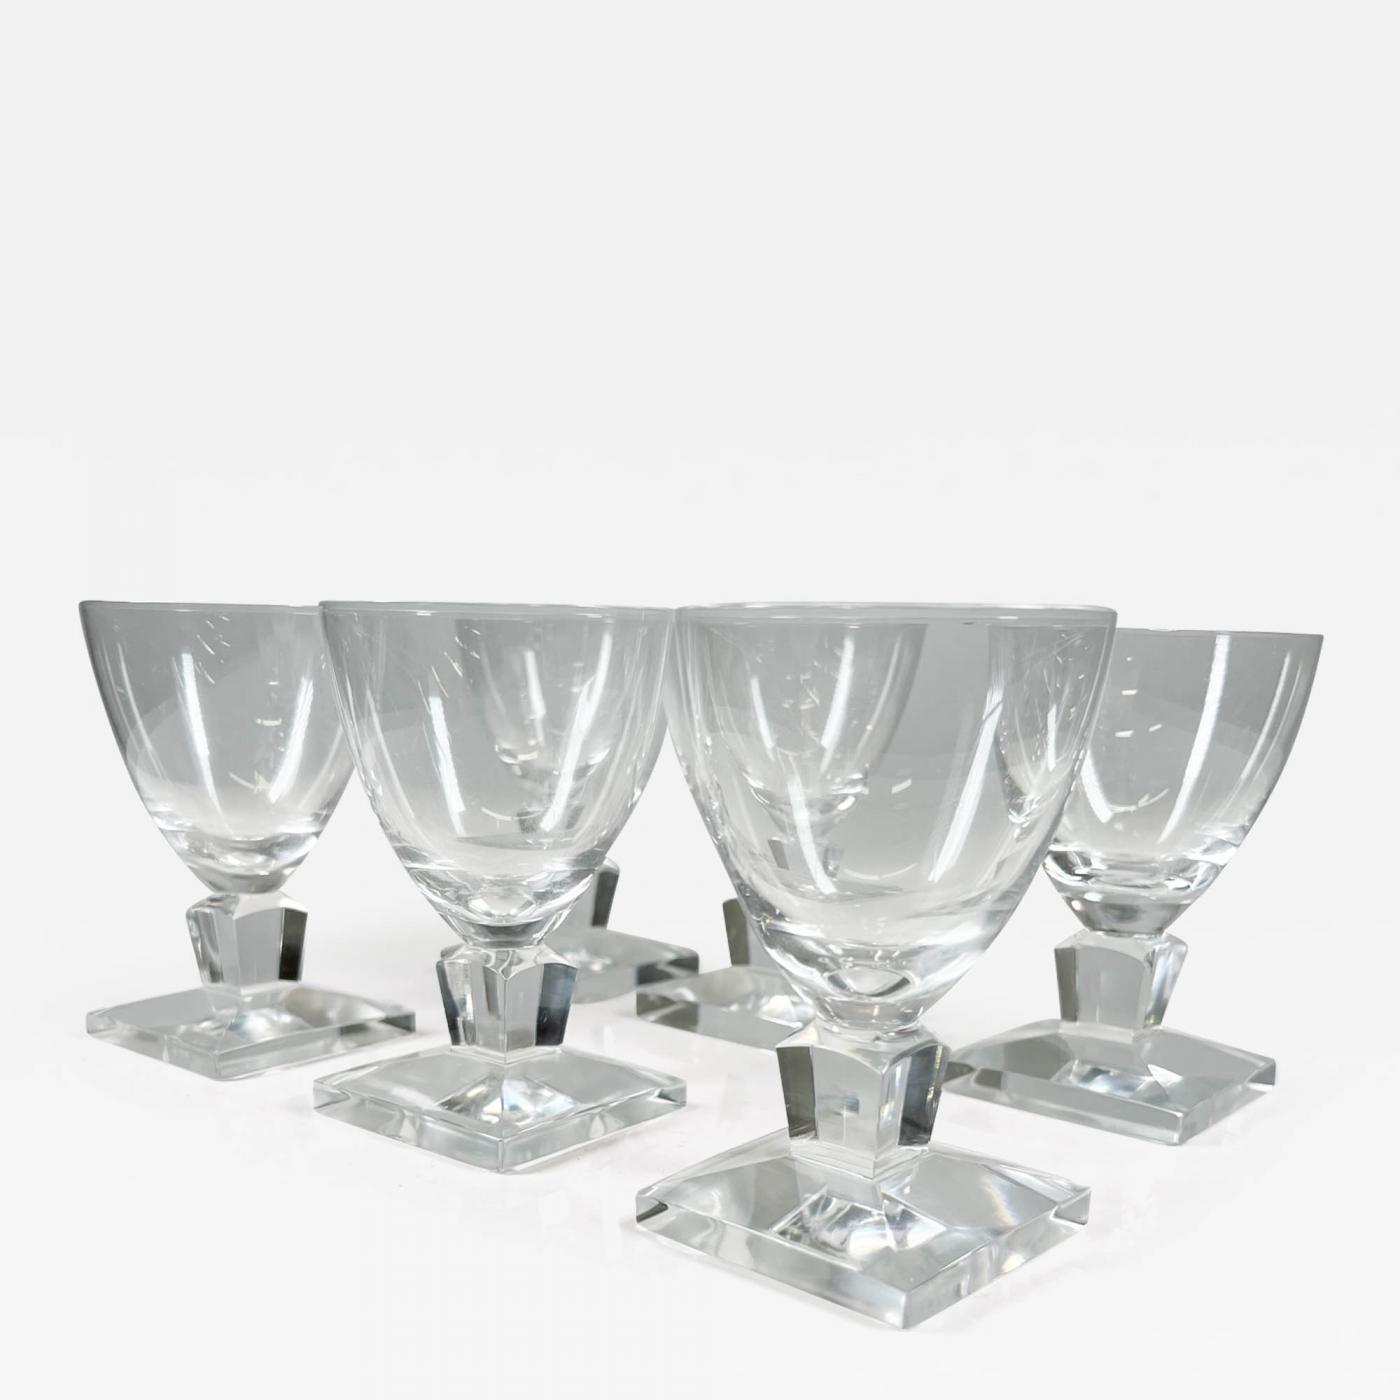 https://cdn.incollect.com/sites/default/files/zoom/Lalique-French-Vintage-Handcraft-Set-of-Six-Crystal-Wine-Glasses-Style-of-Lalique-612980-2908451.jpg